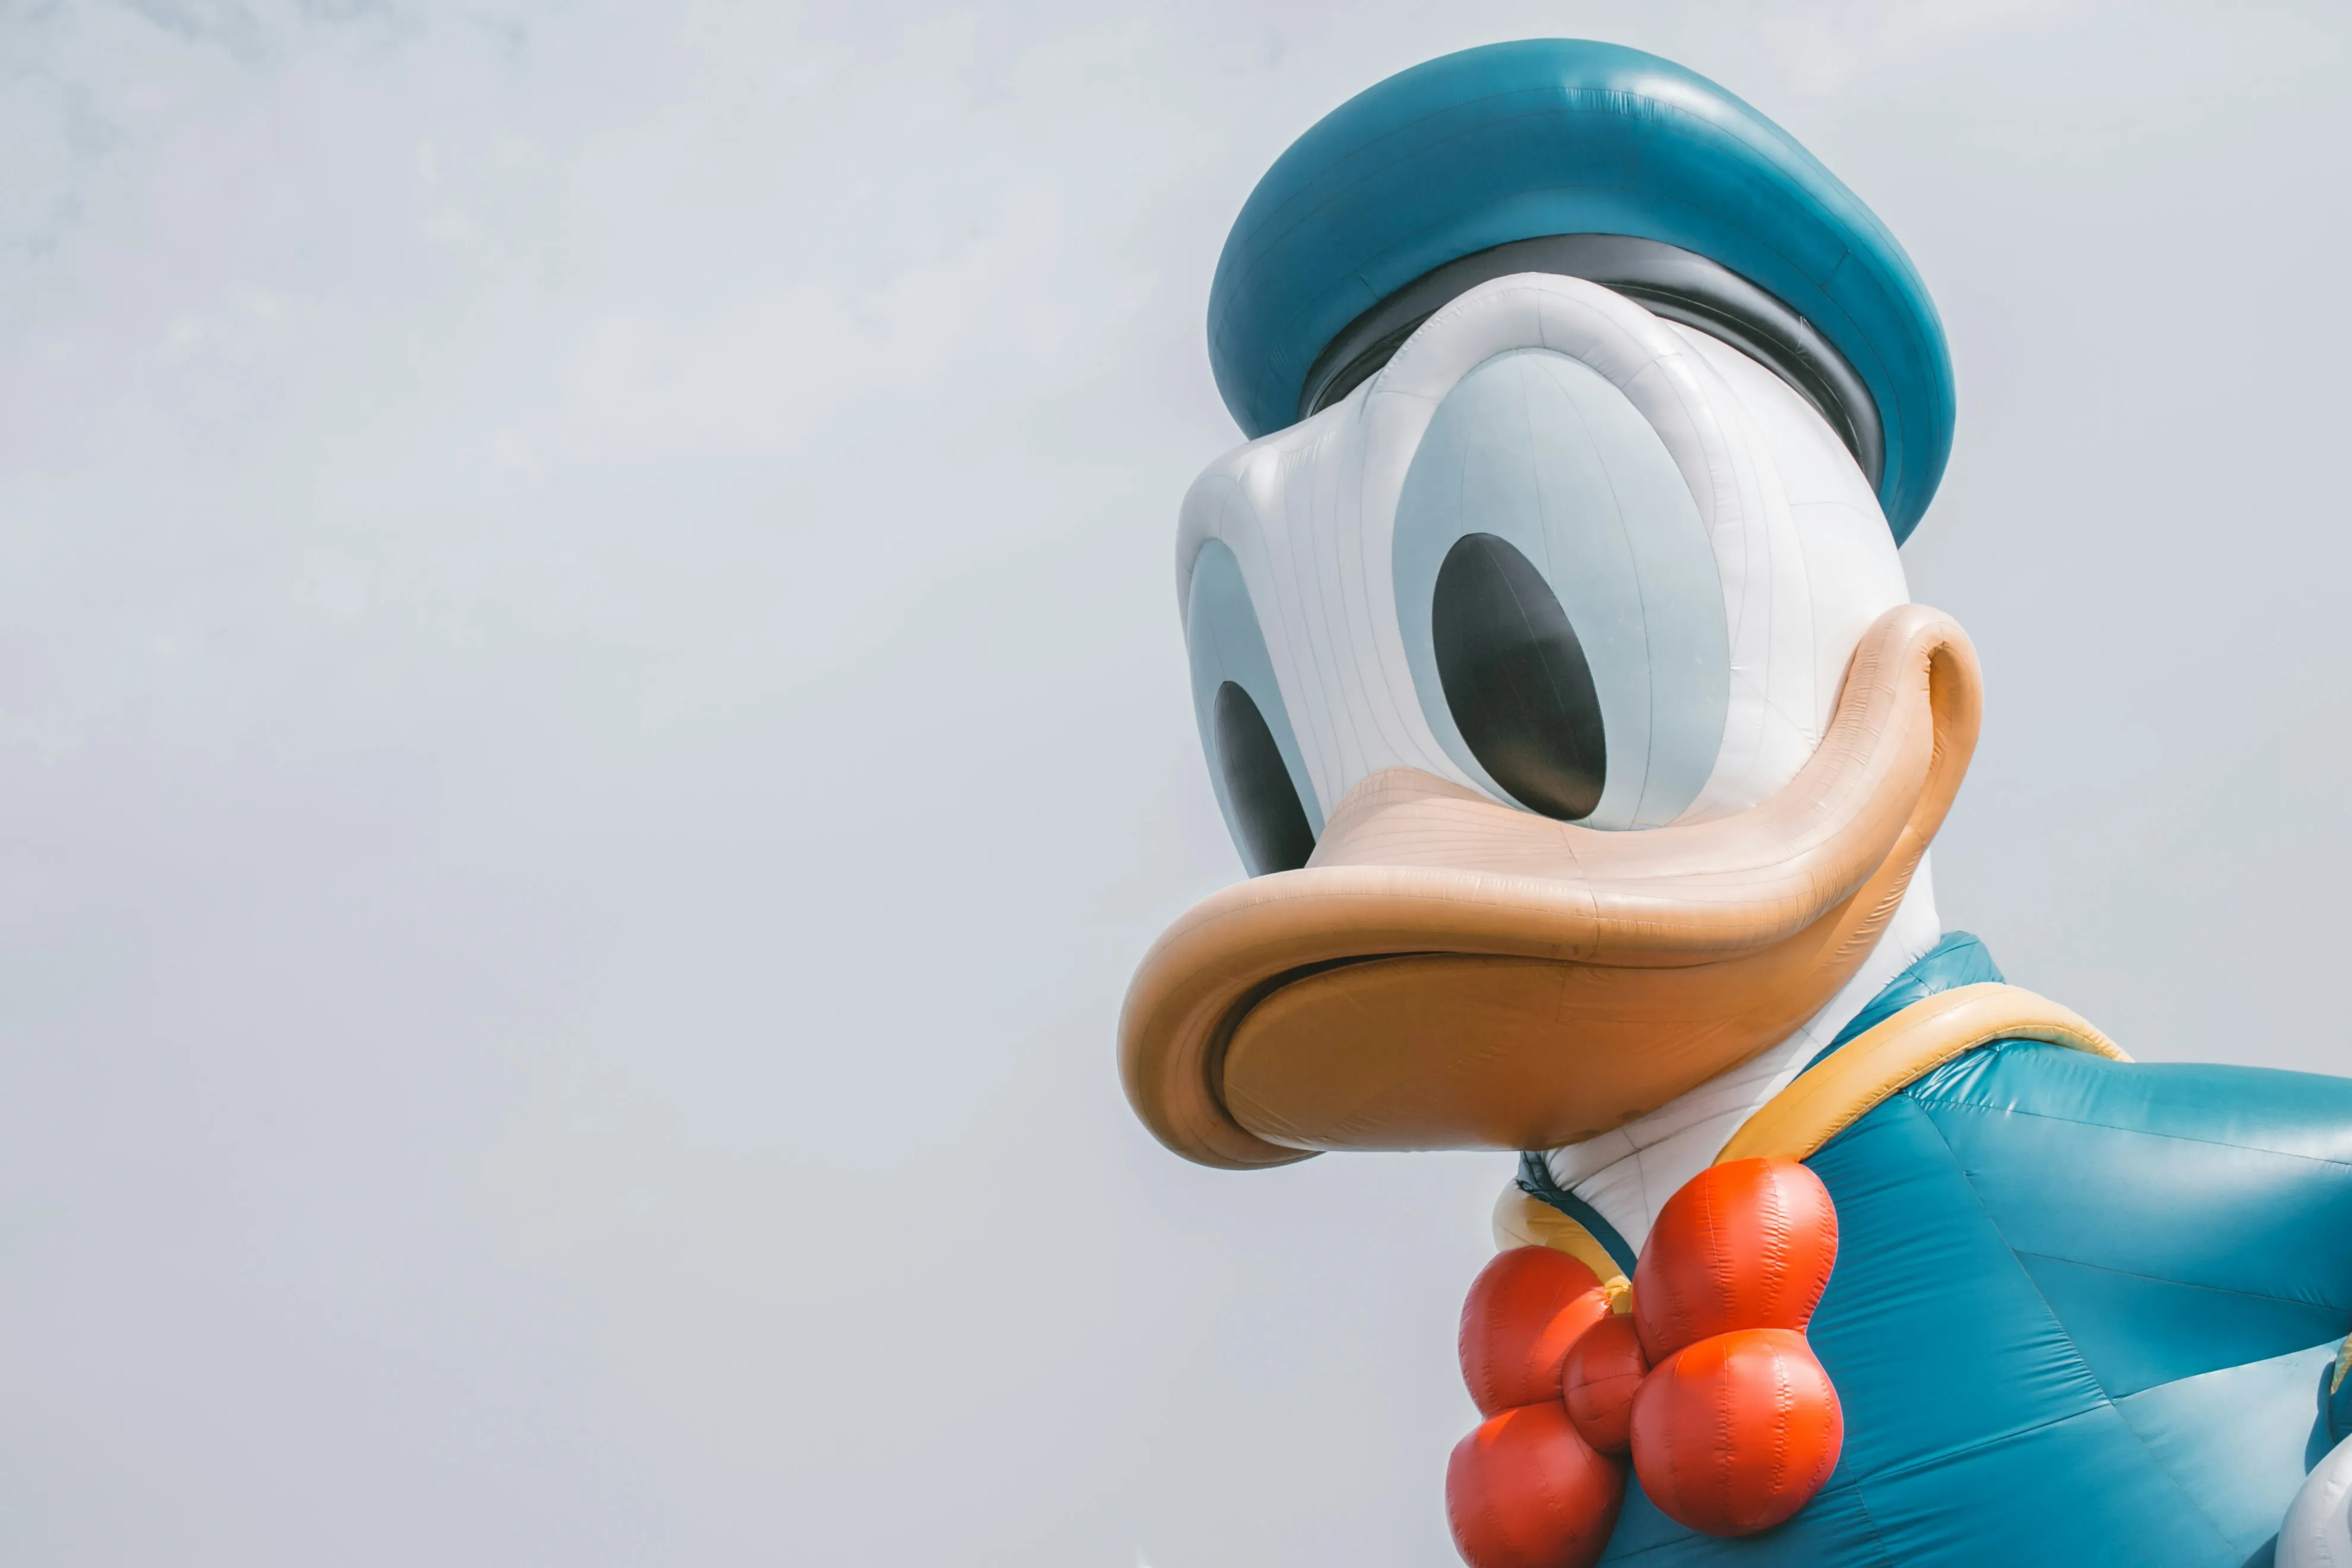 Meet Disney characters on a Disney vacation.